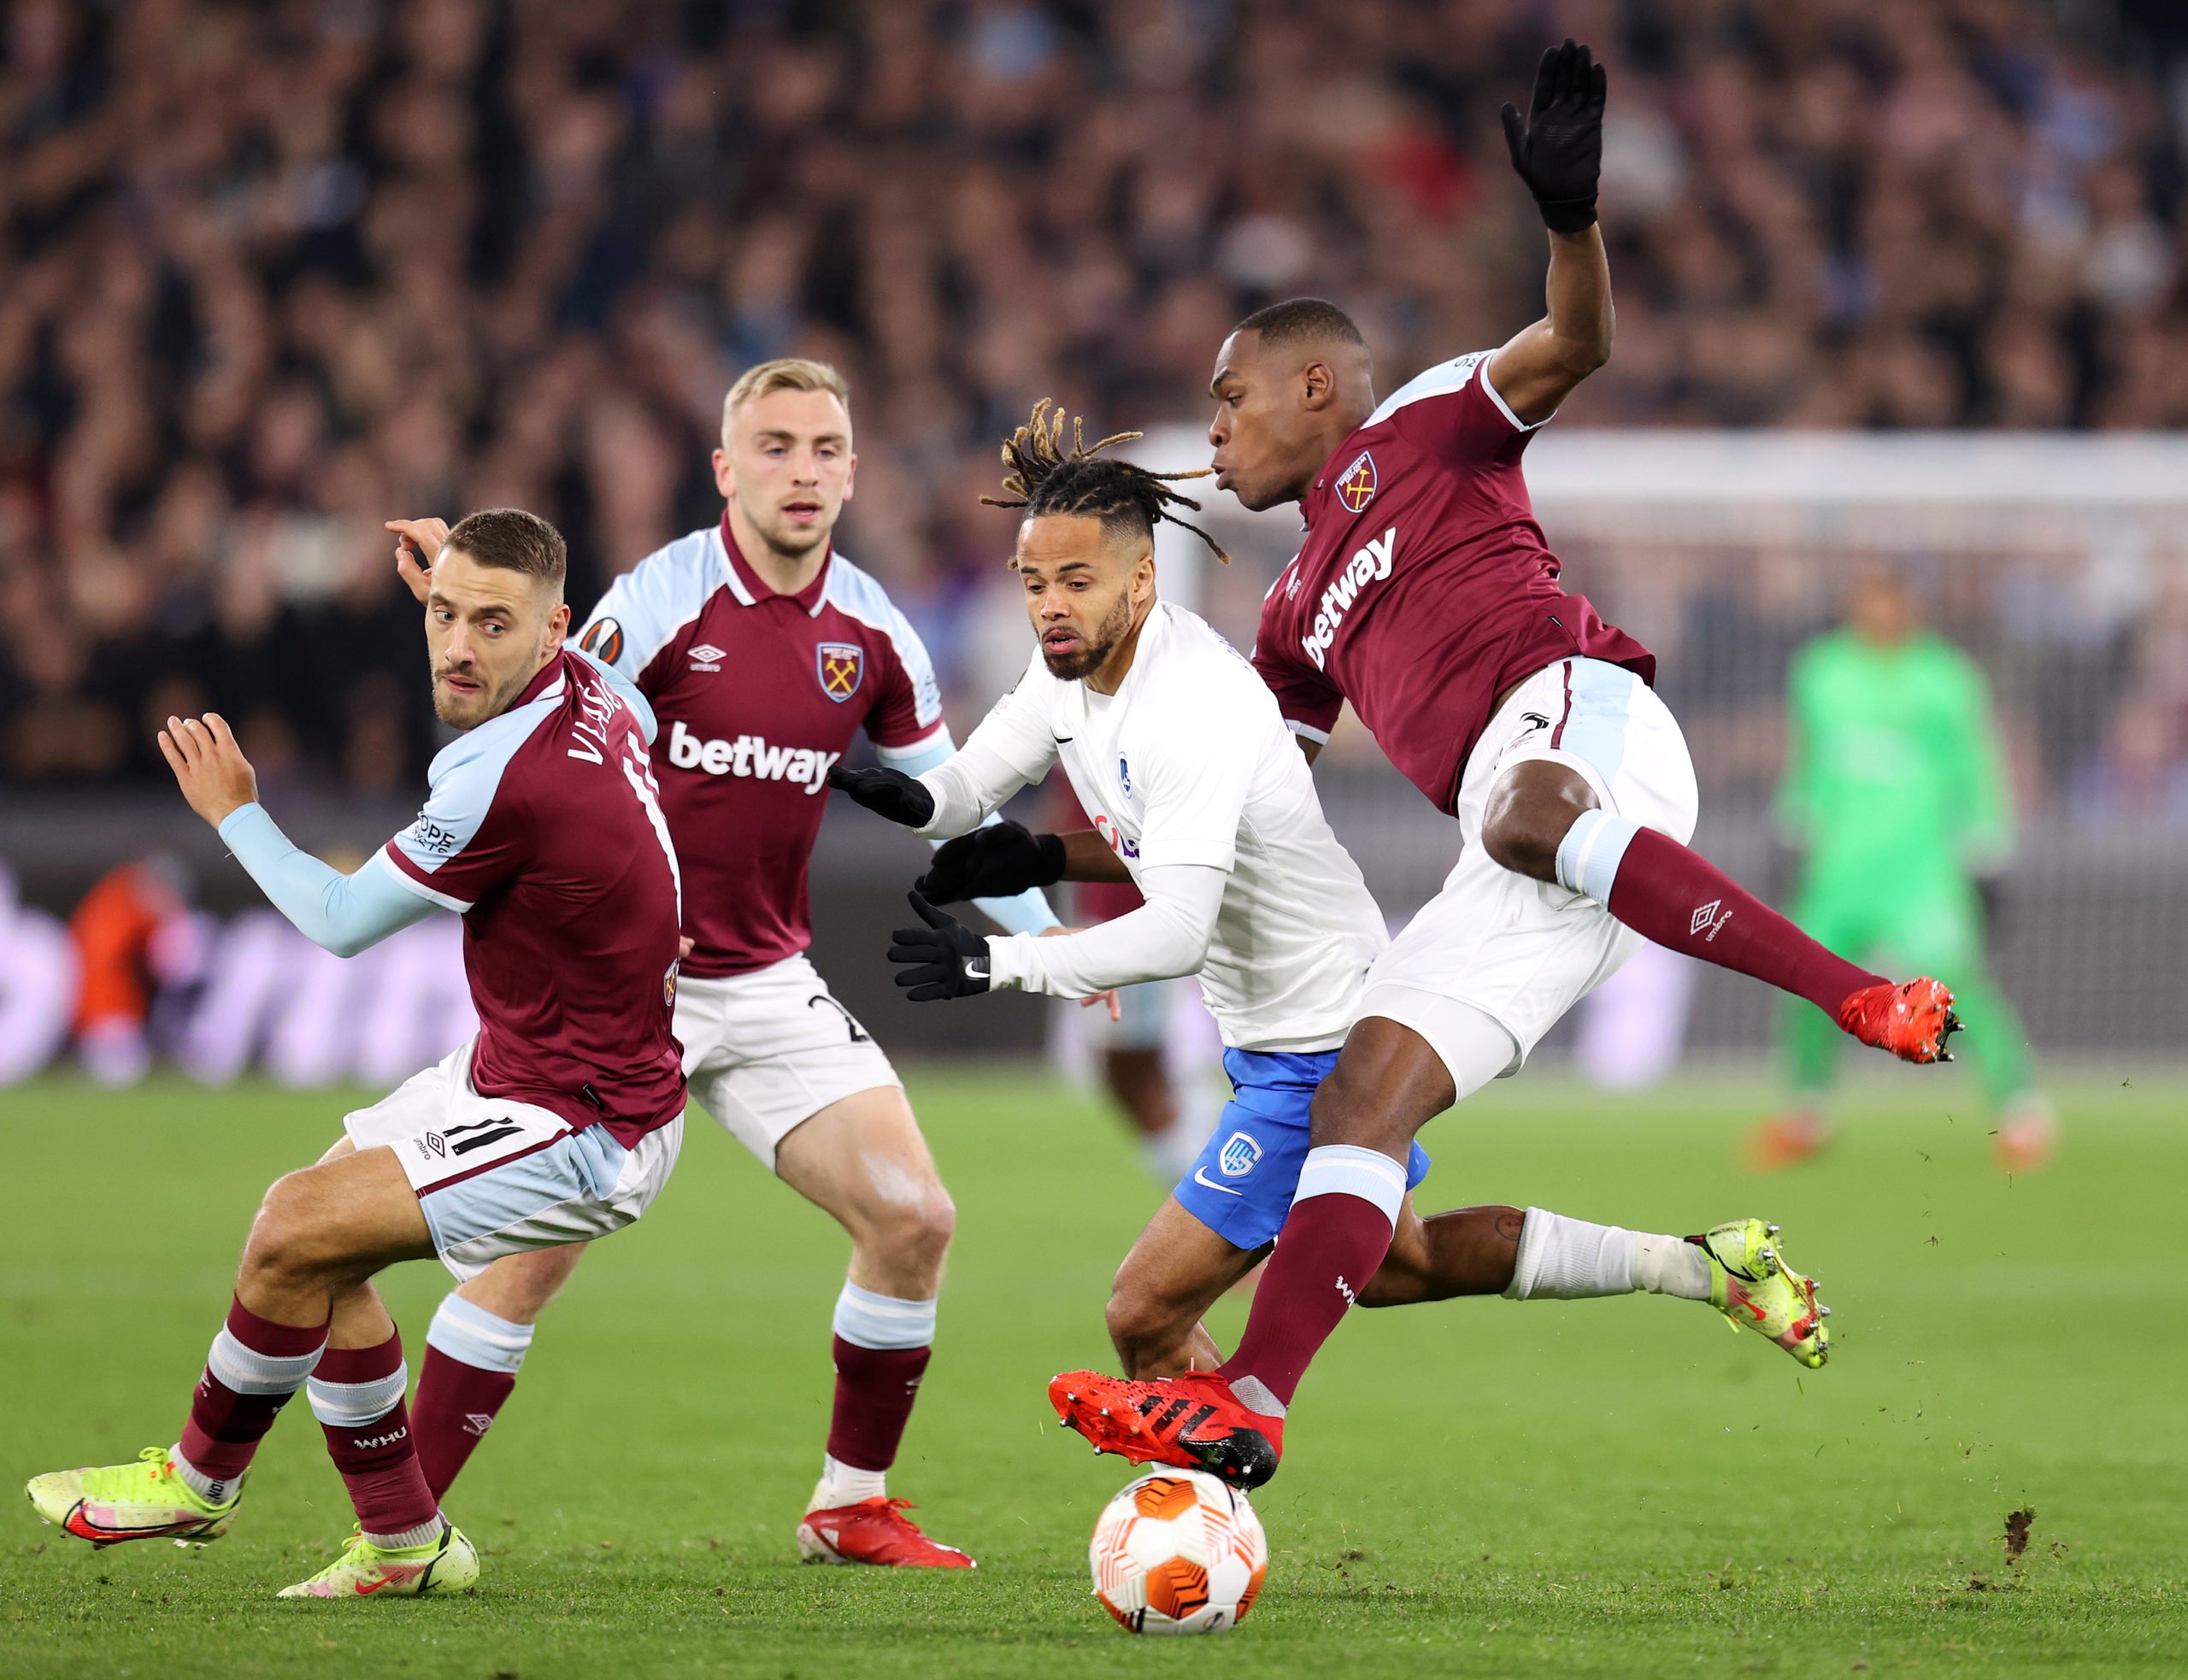 Lyon move a step closer to signing Issa Diop from West Ham, report claims